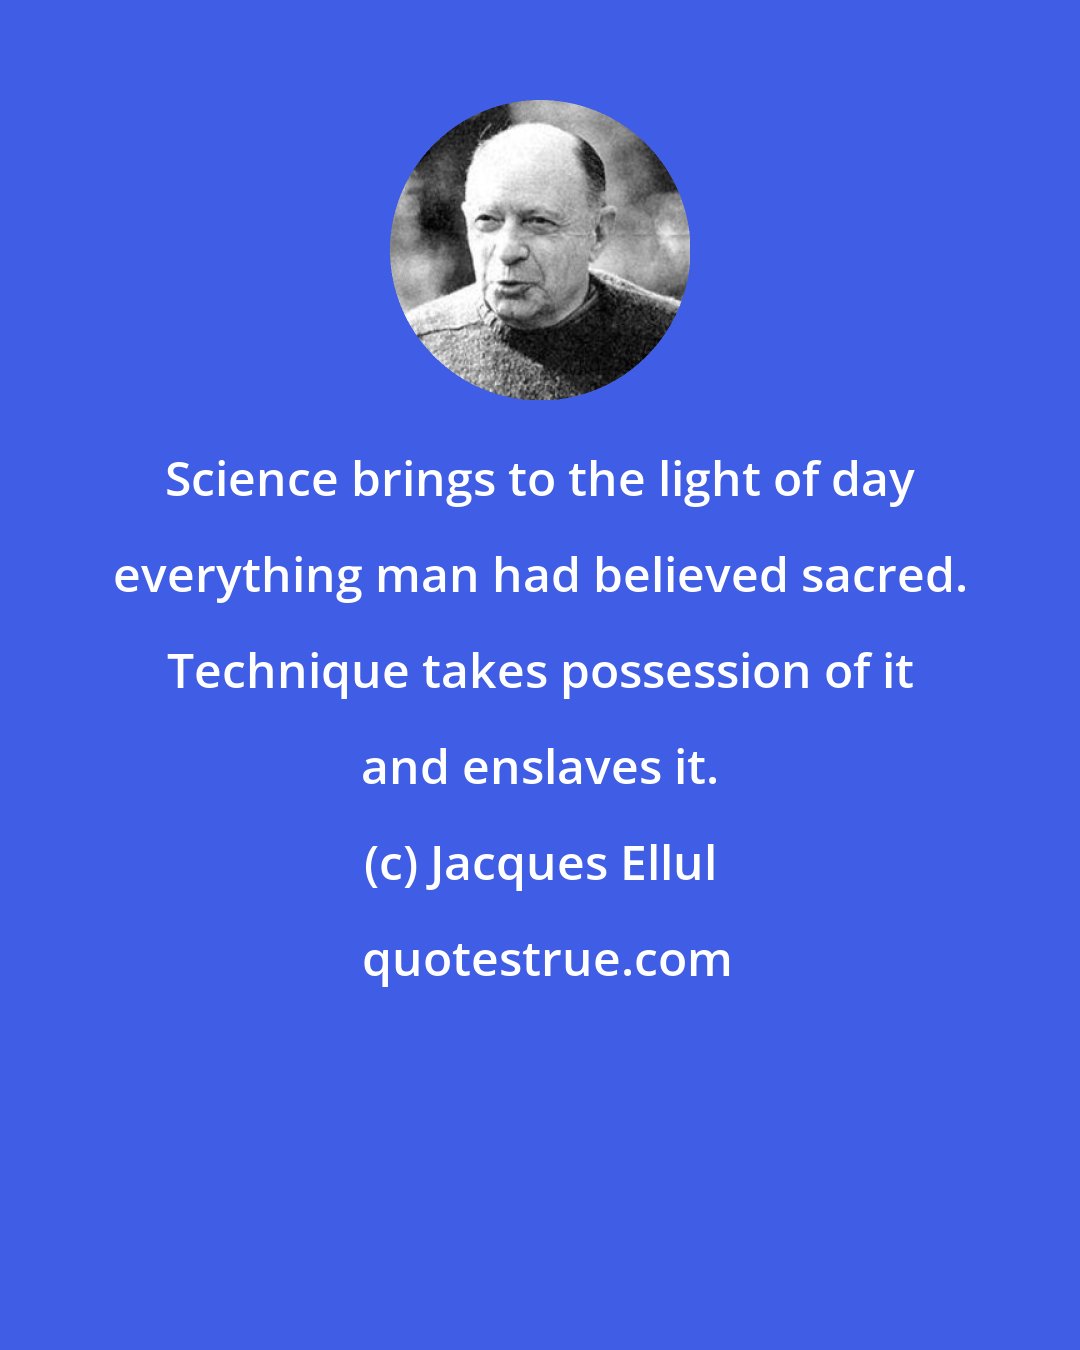 Jacques Ellul: Science brings to the light of day everything man had believed sacred. Technique takes possession of it and enslaves it.